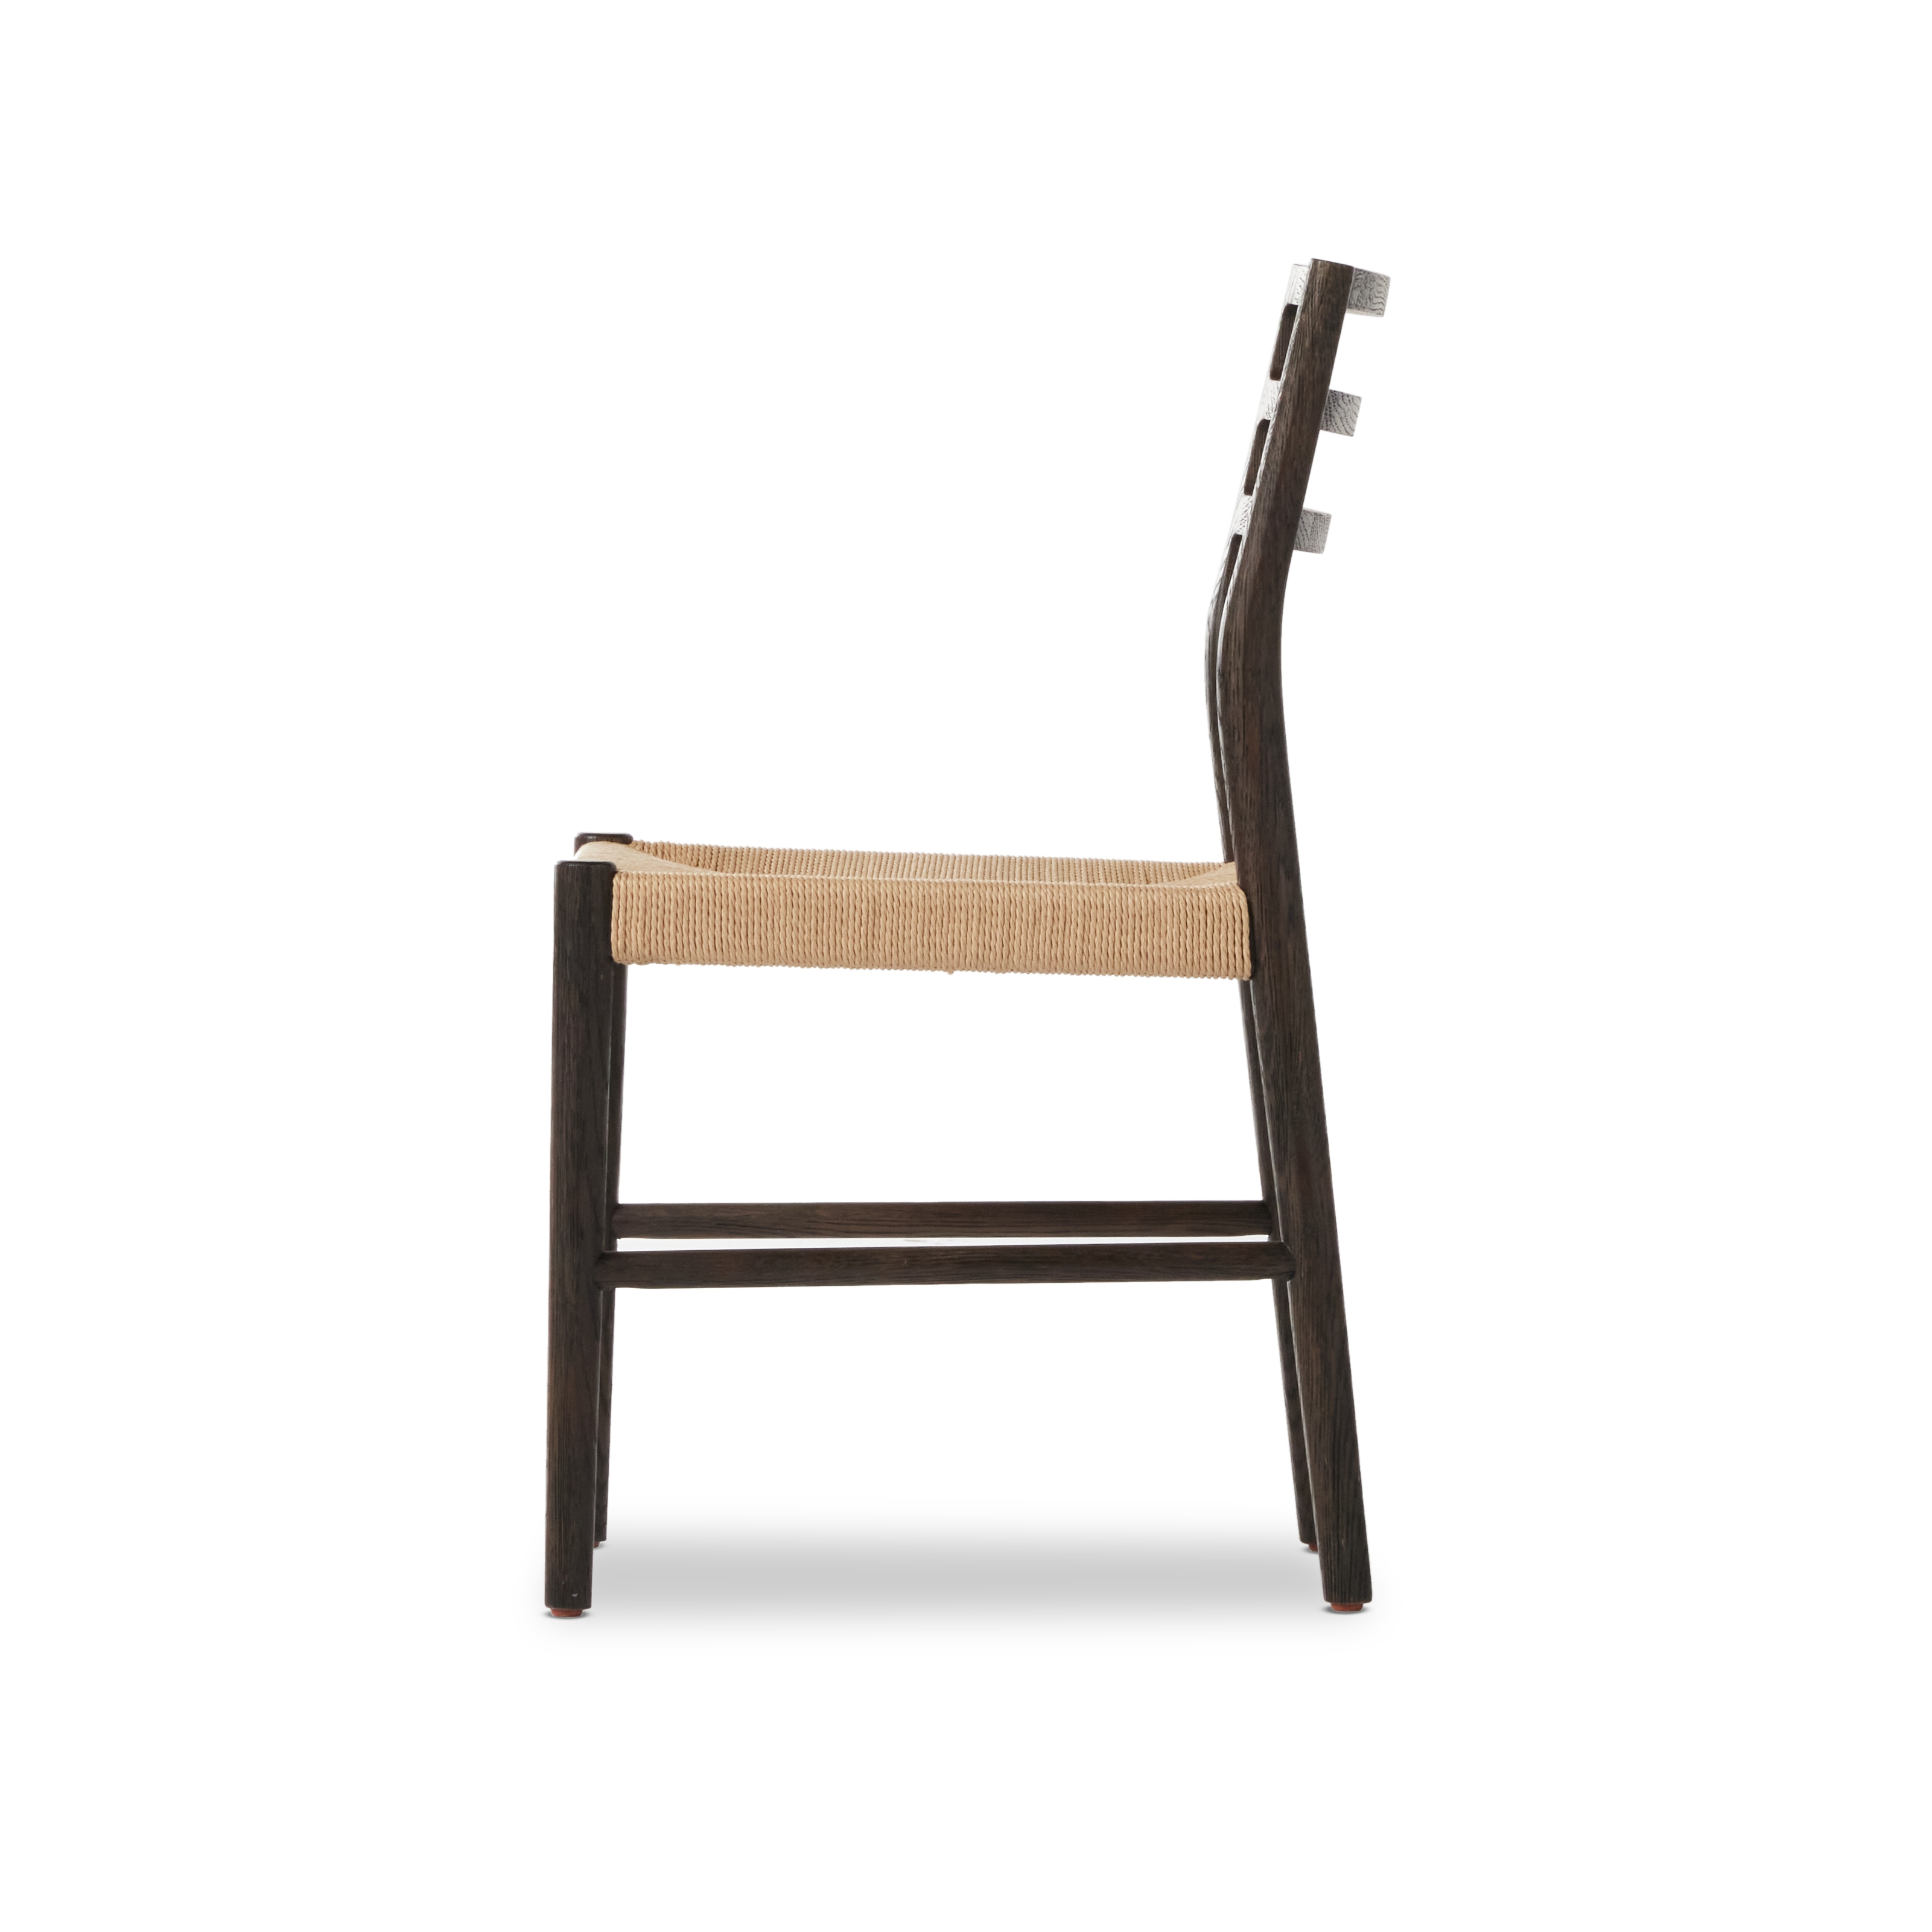 Glenmore Woven Dining Chair-Light Carbon - Image 4